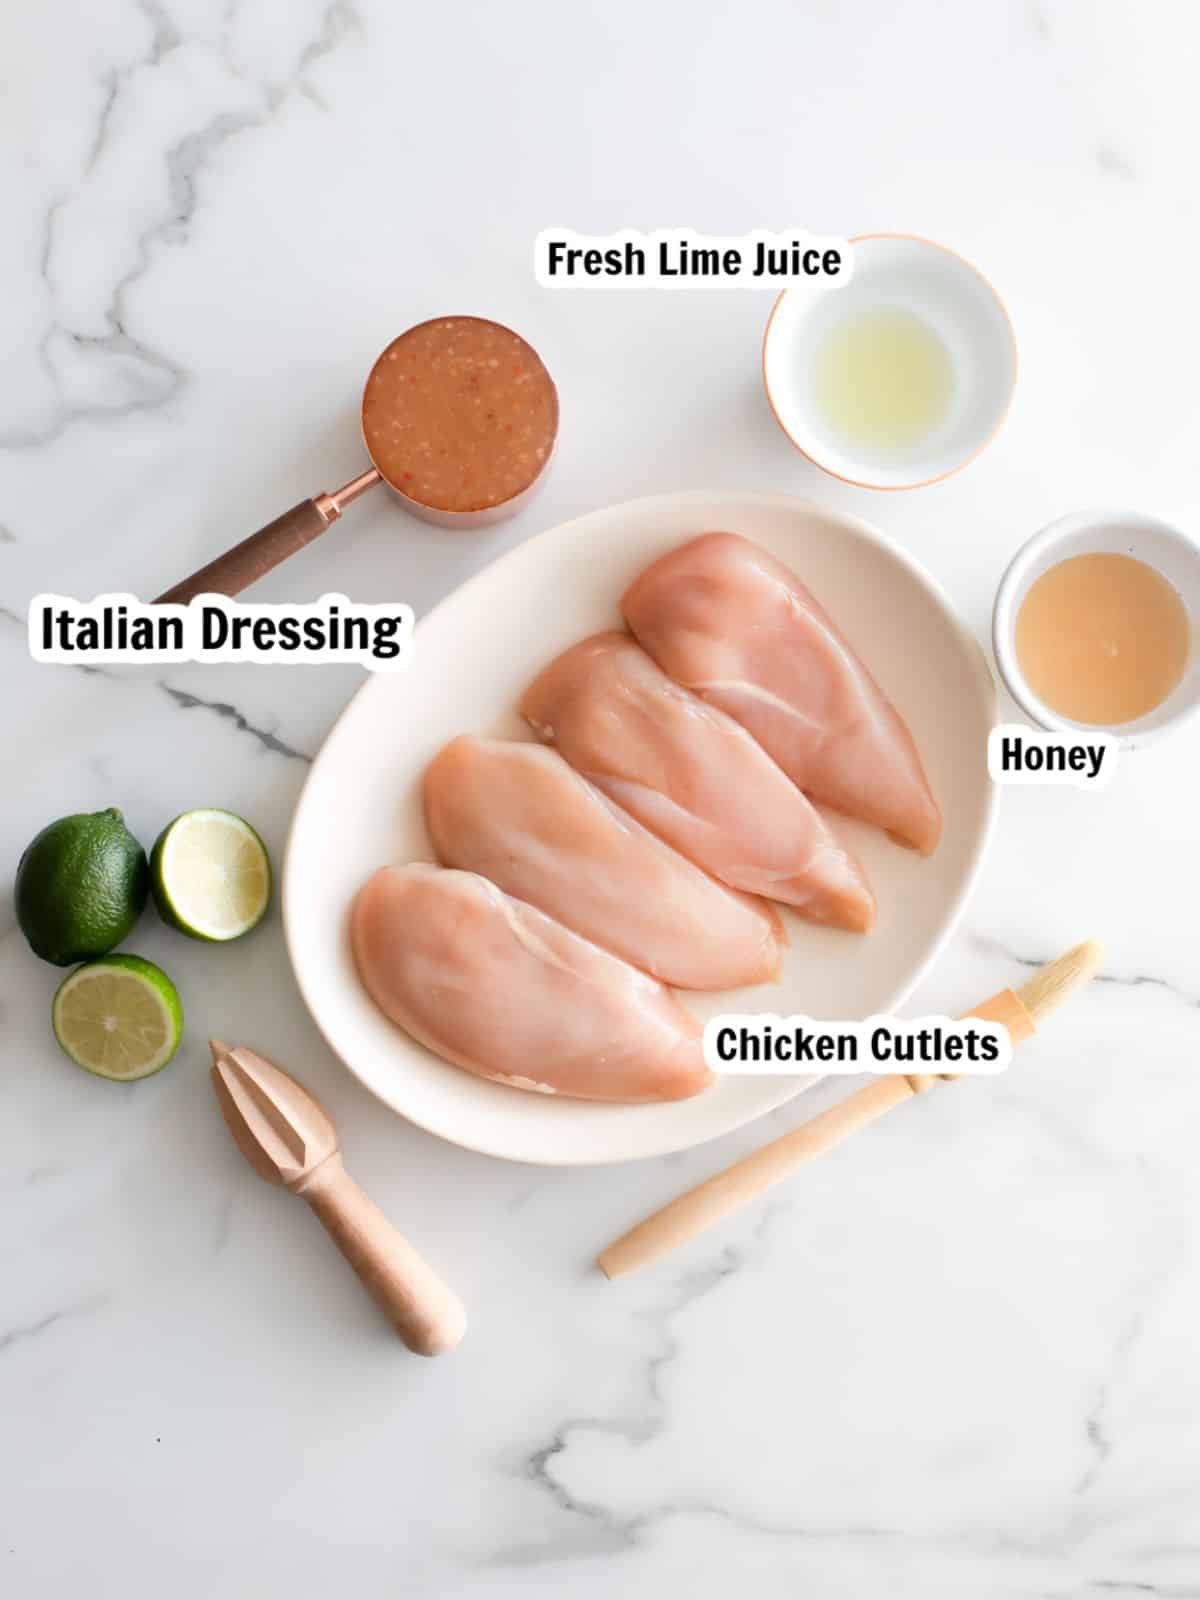 Ingredients for baked chicken cutlets with Italian dressing and honey marinade.